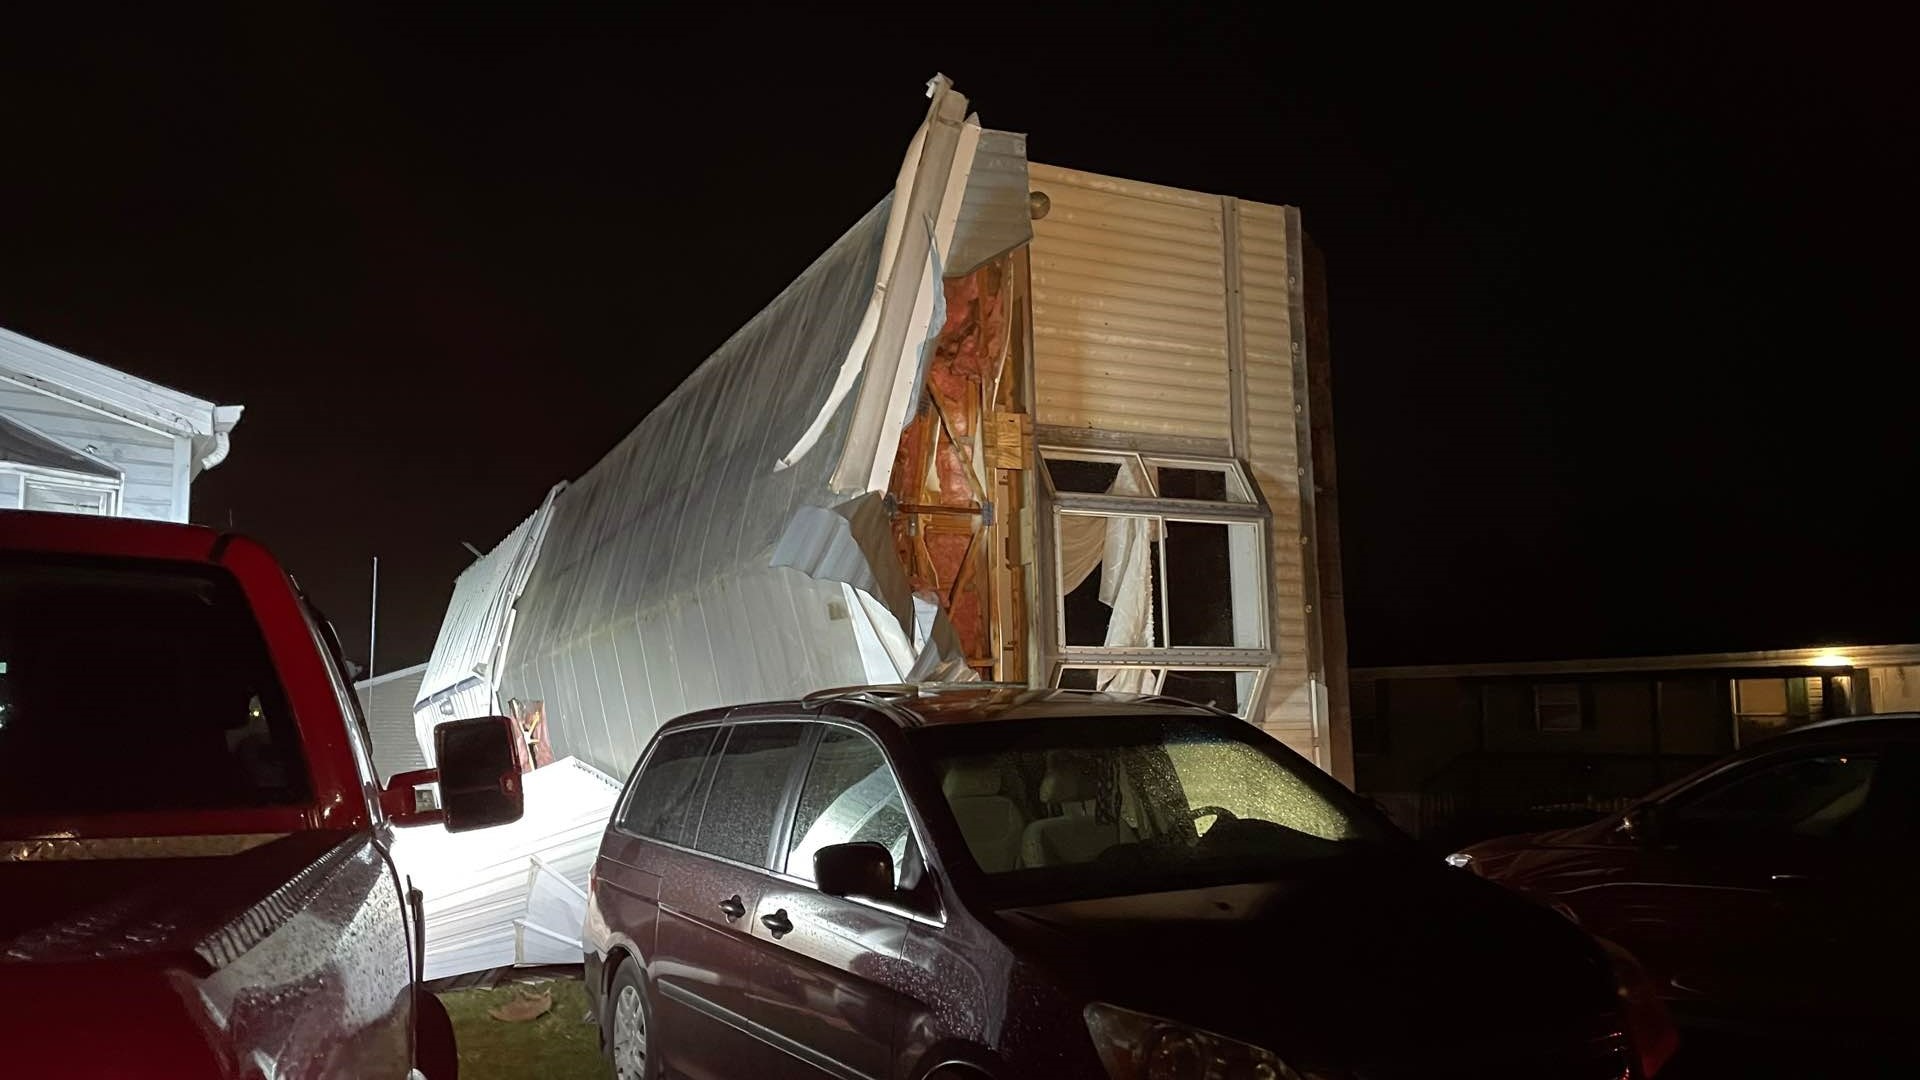 The sheriff's office said a tornado hit the community, but that will need to be confirmed by the National Weather Service.